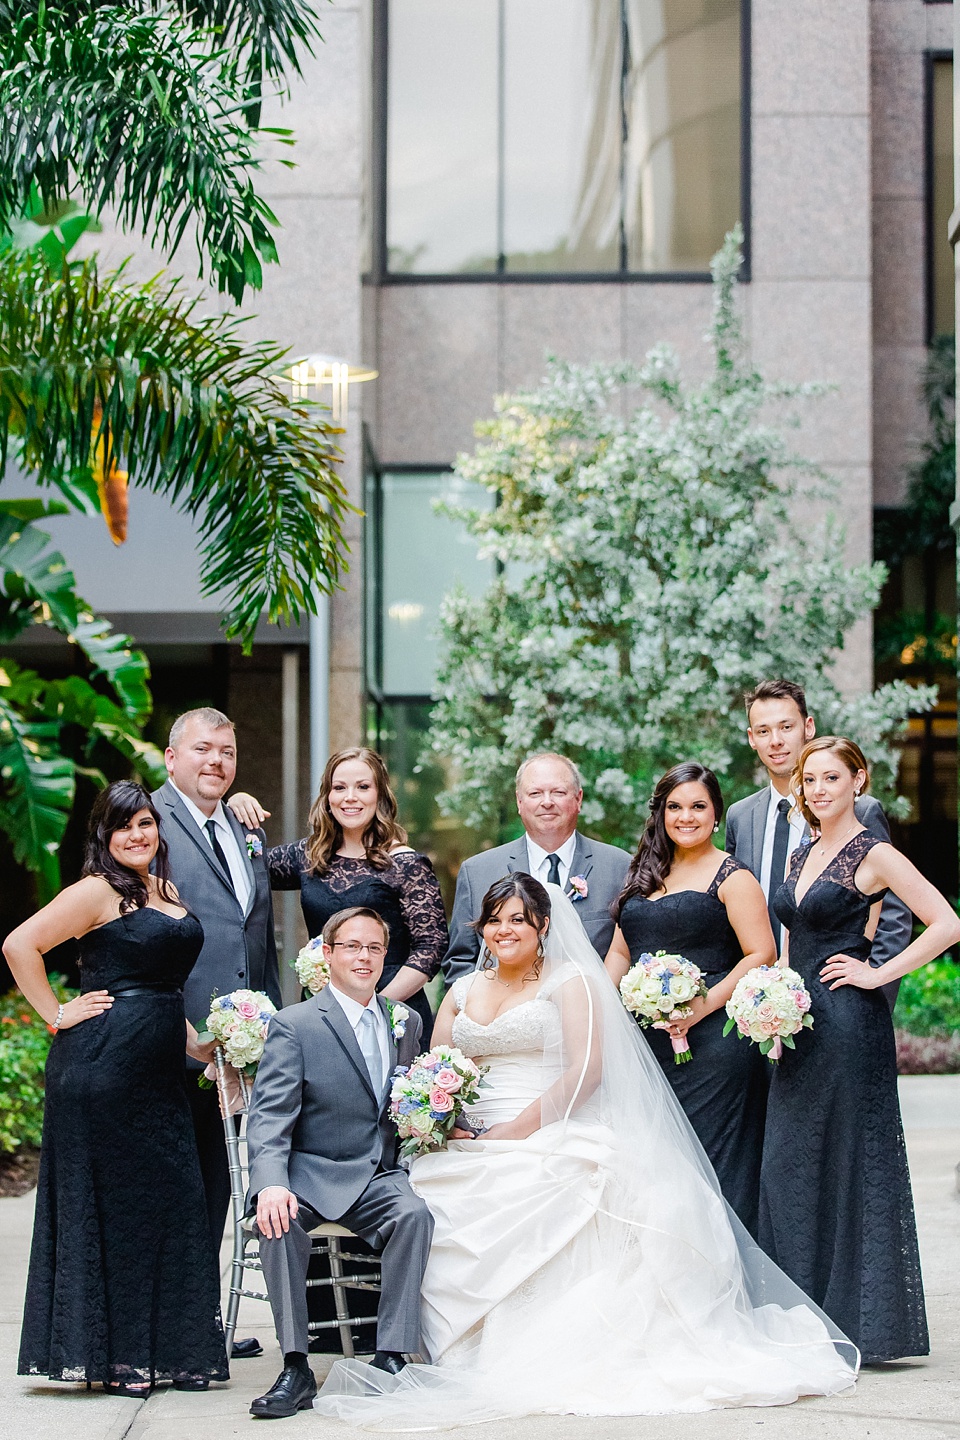 Intercontinental Tampa Wedding | © Ailyn La Torre Photography 2015